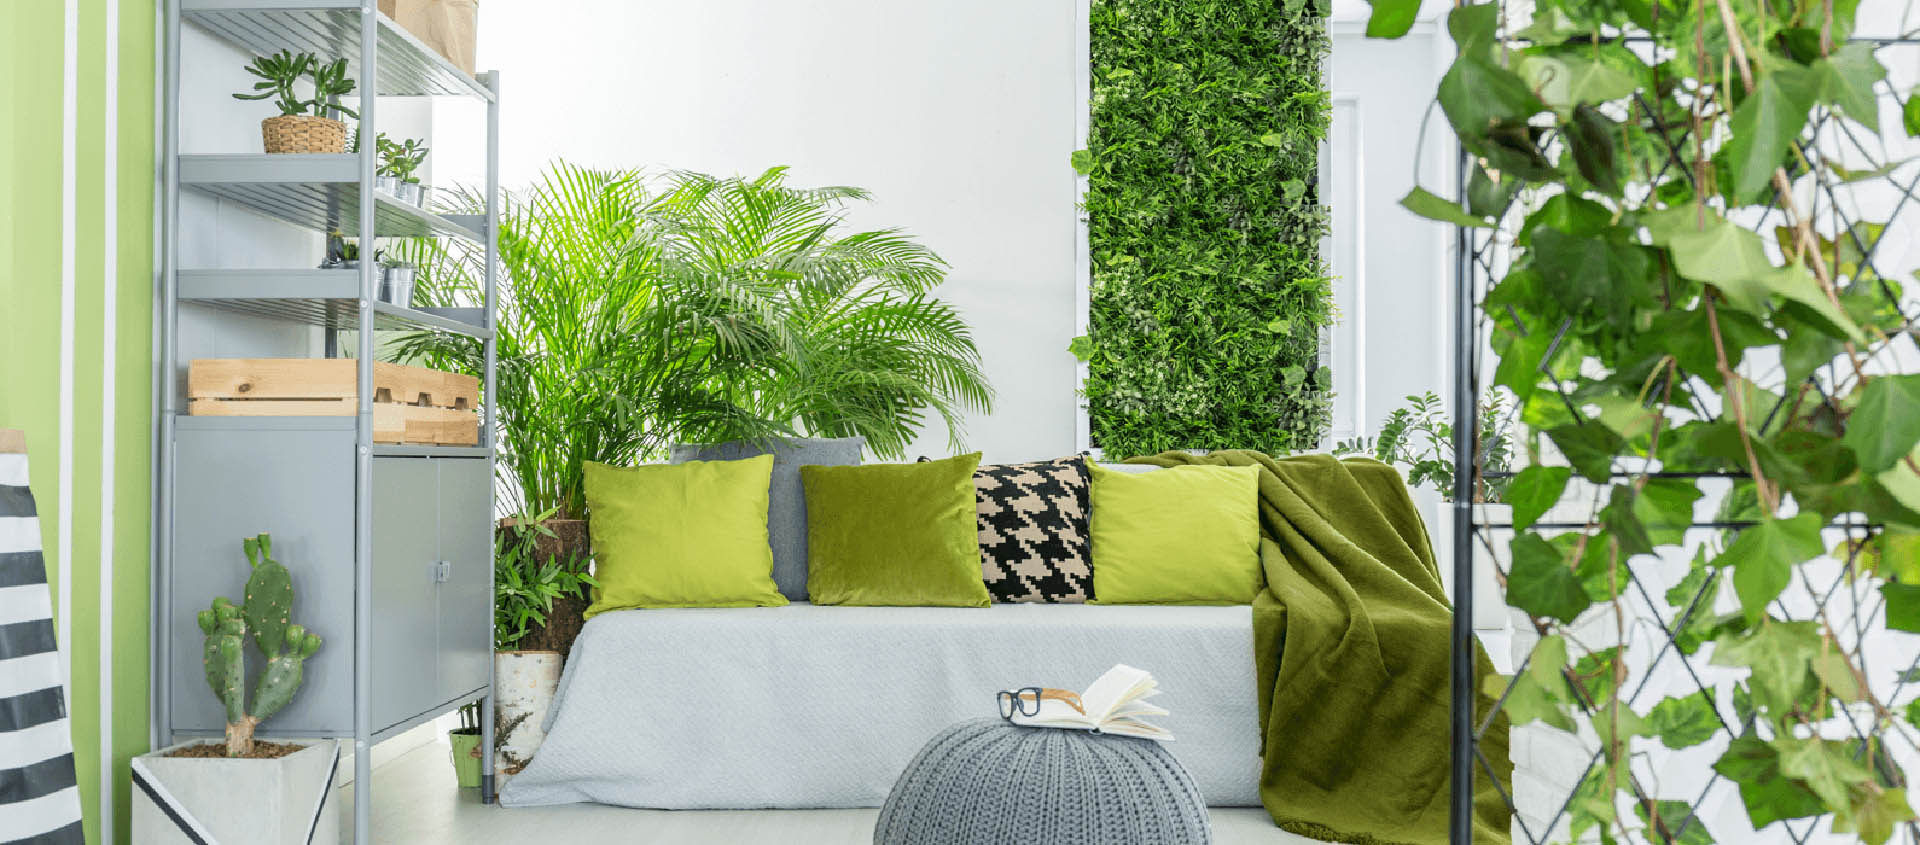 using-plants-purify-air-your-home-featured-image